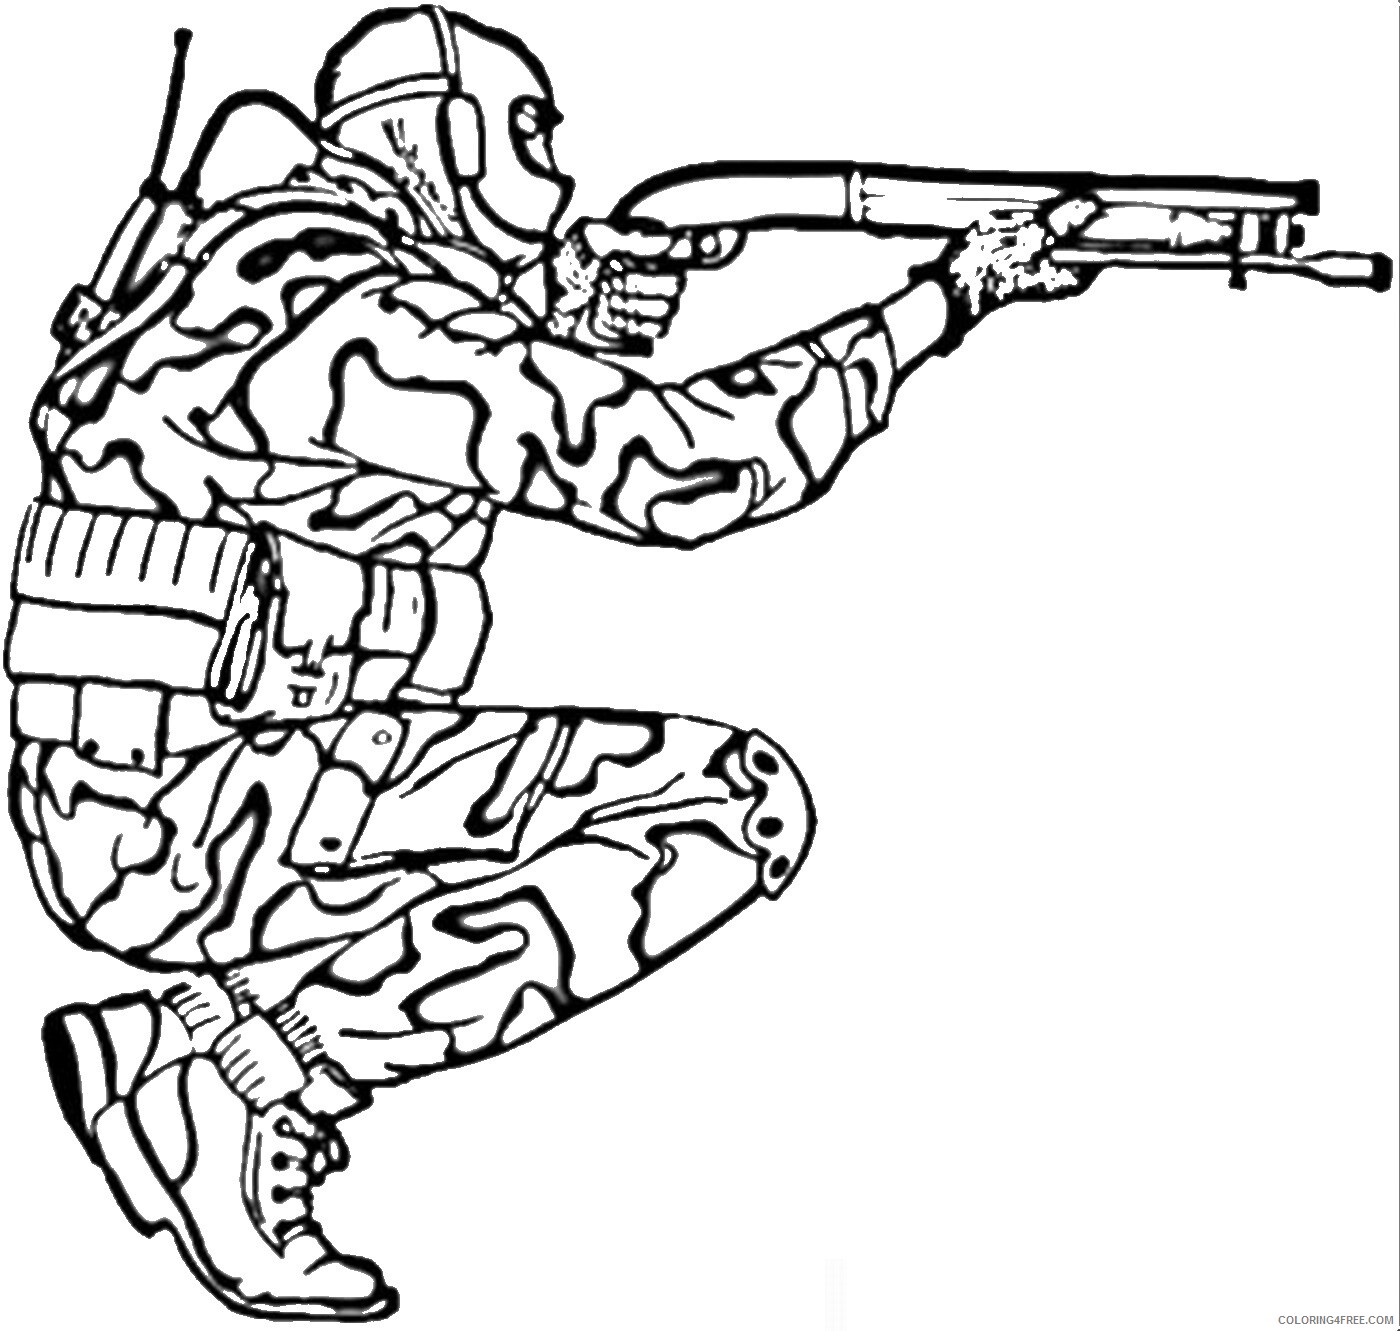 Army Coloring Pages army_cl27 Printable 2021 0263 Coloring4free